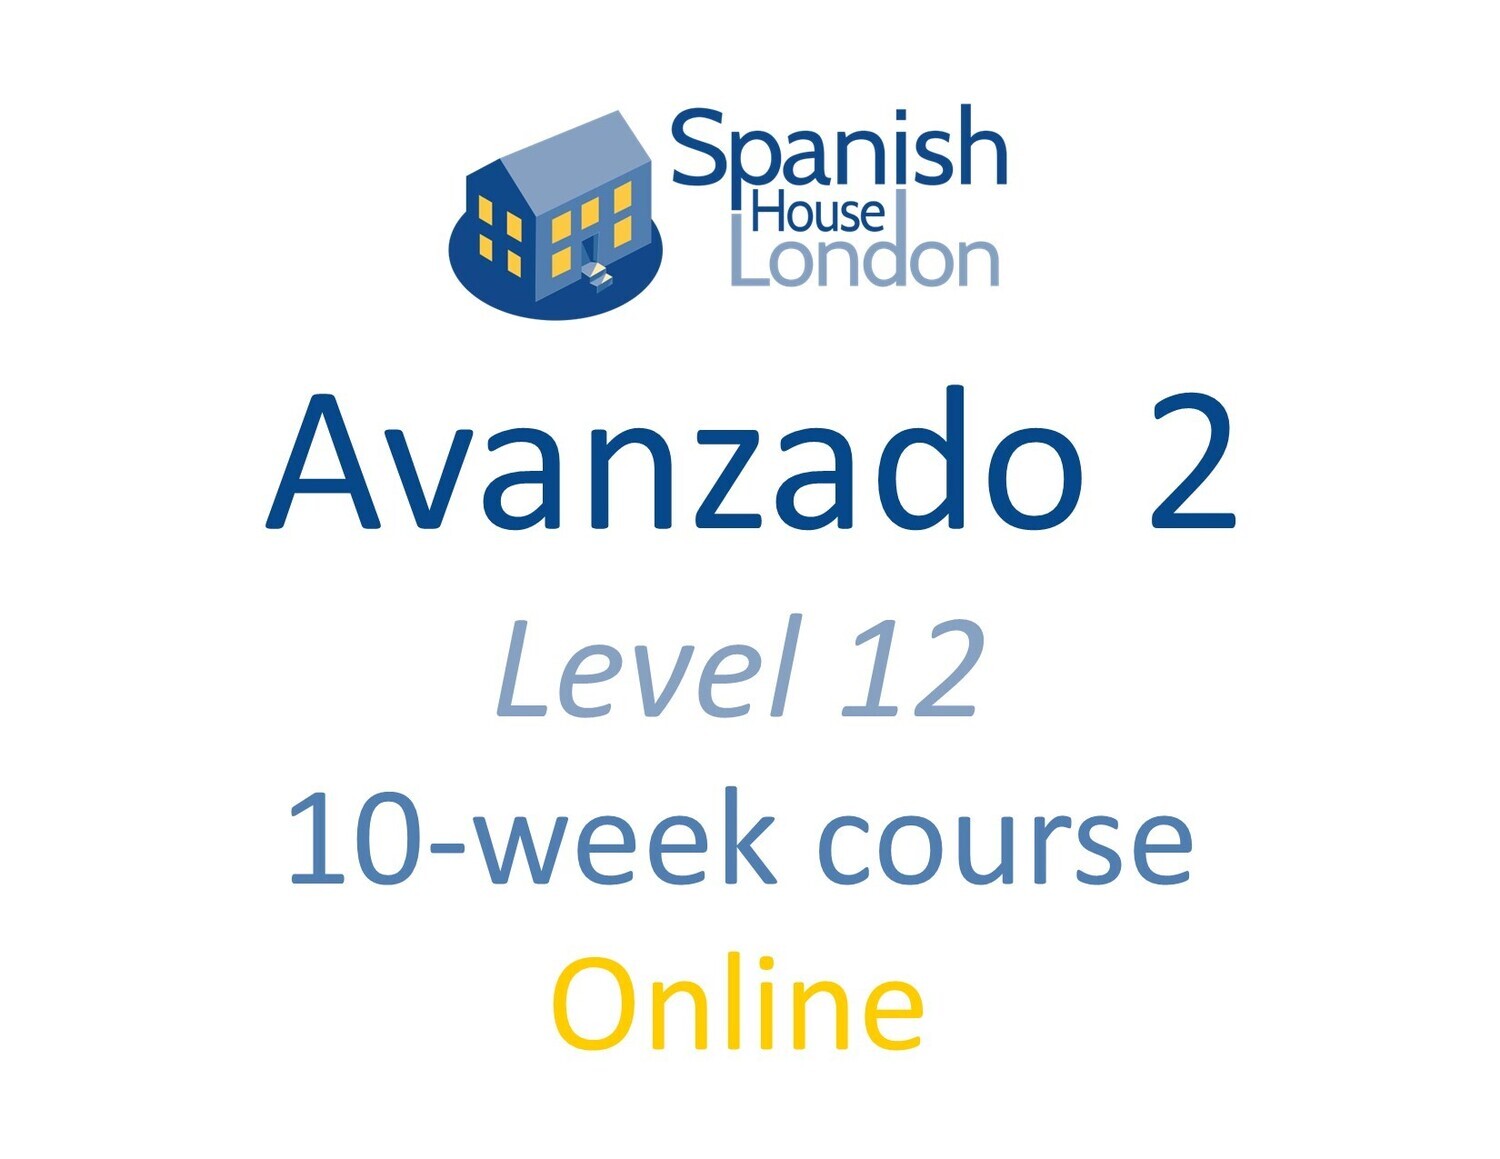 Avanzado 2 Course starting on 24th March at 7.30pm